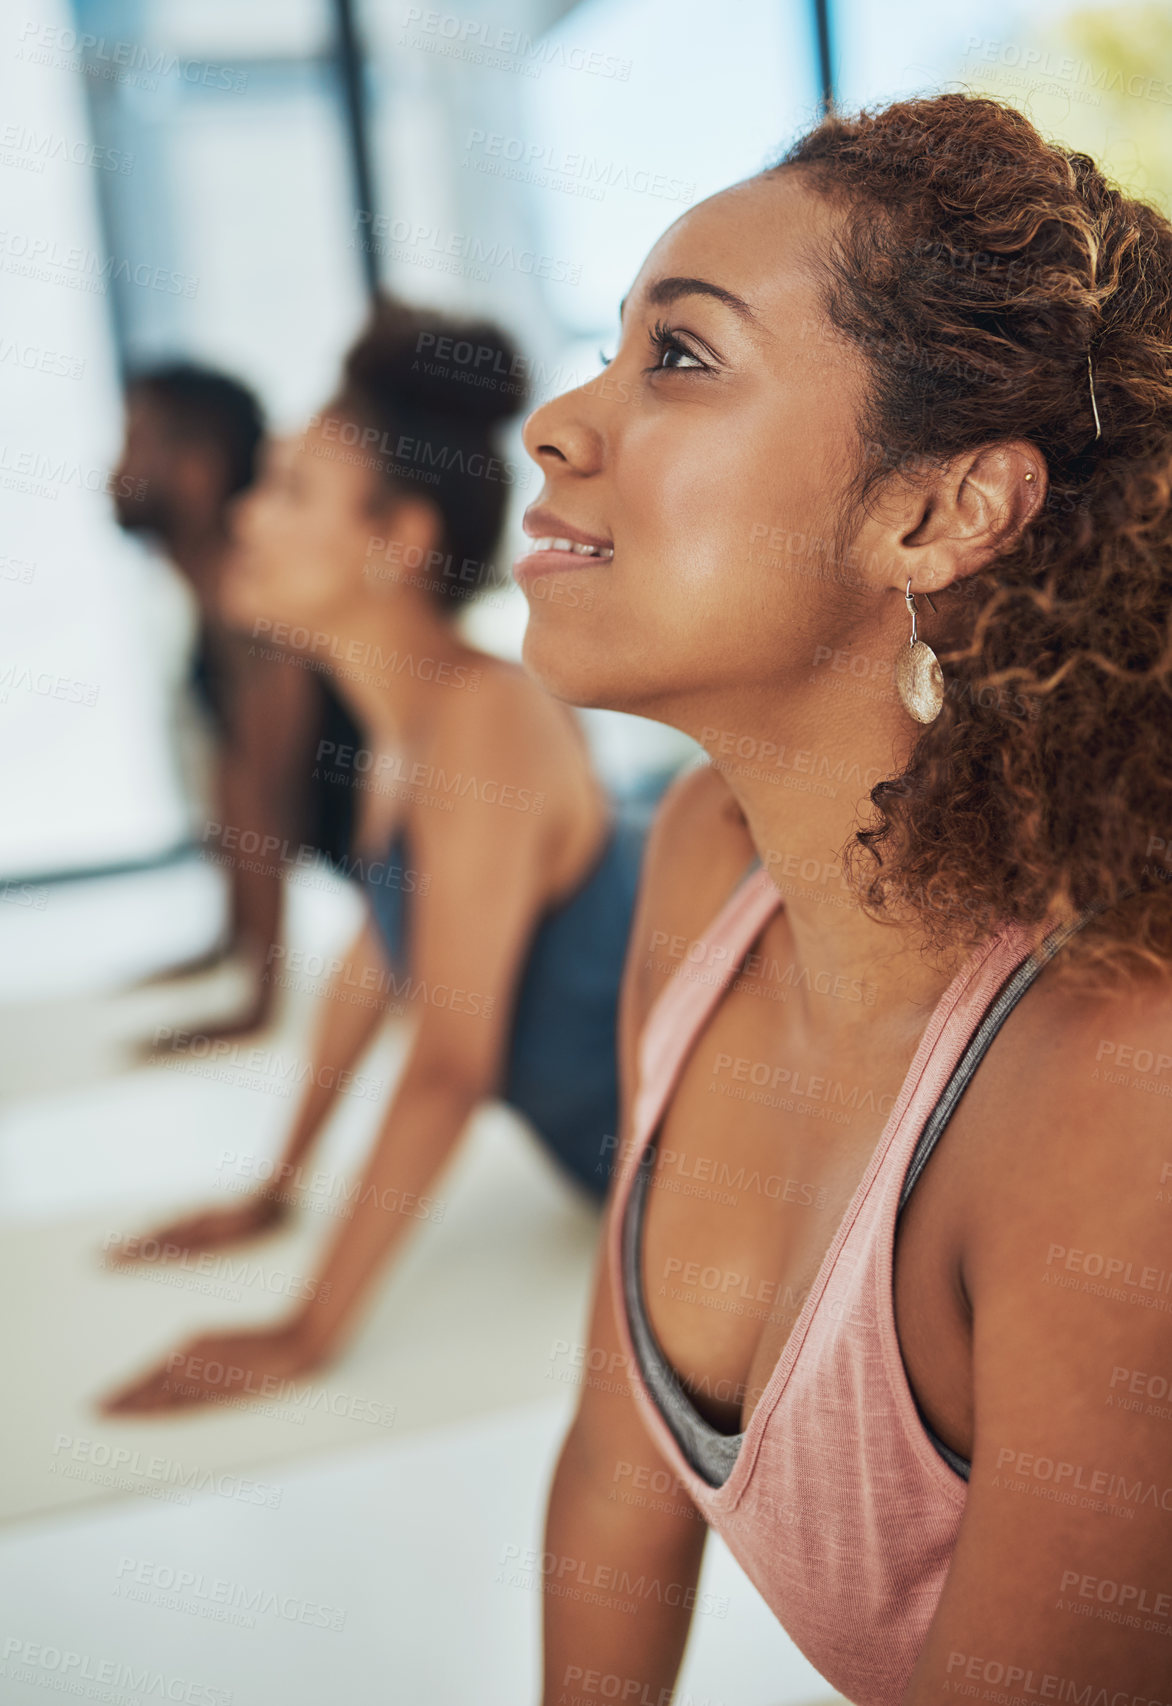 Buy stock photo Shot of a group of people doing yoga